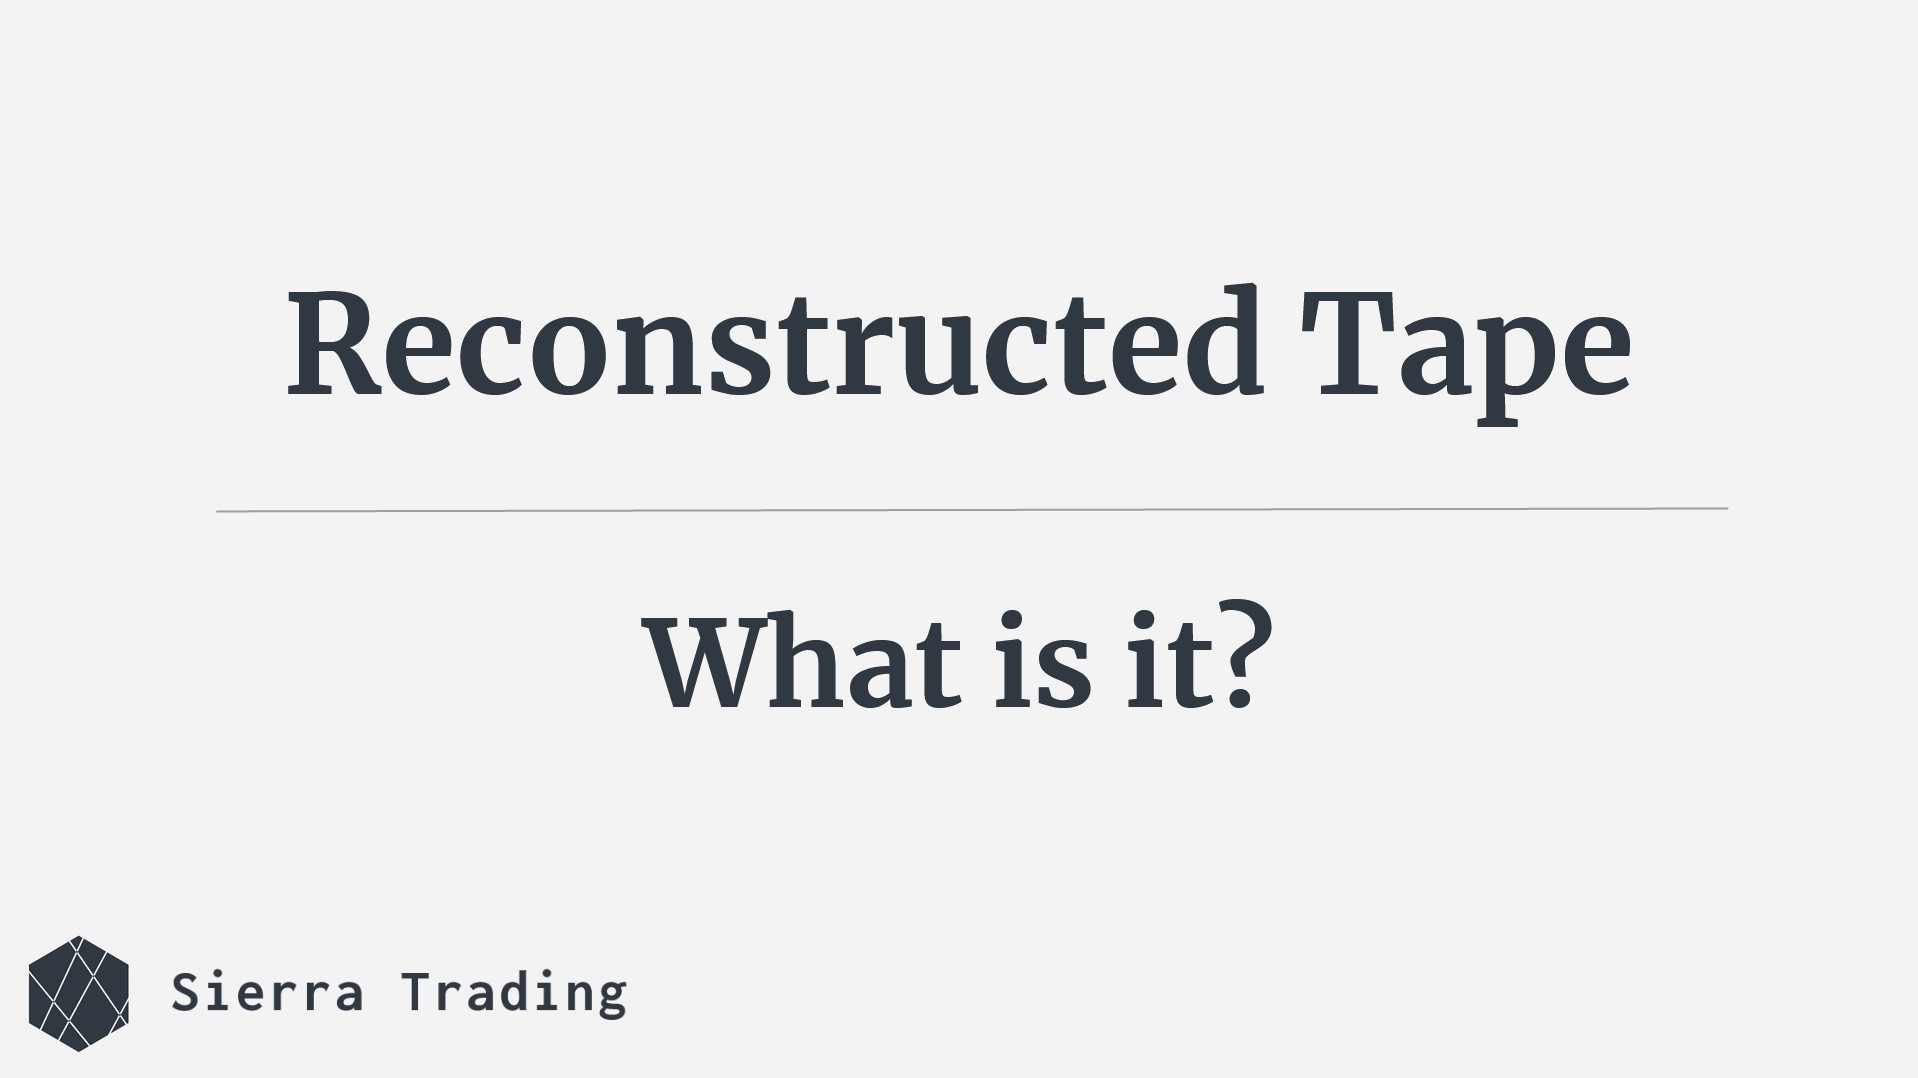 What is the Reconstructed Tape